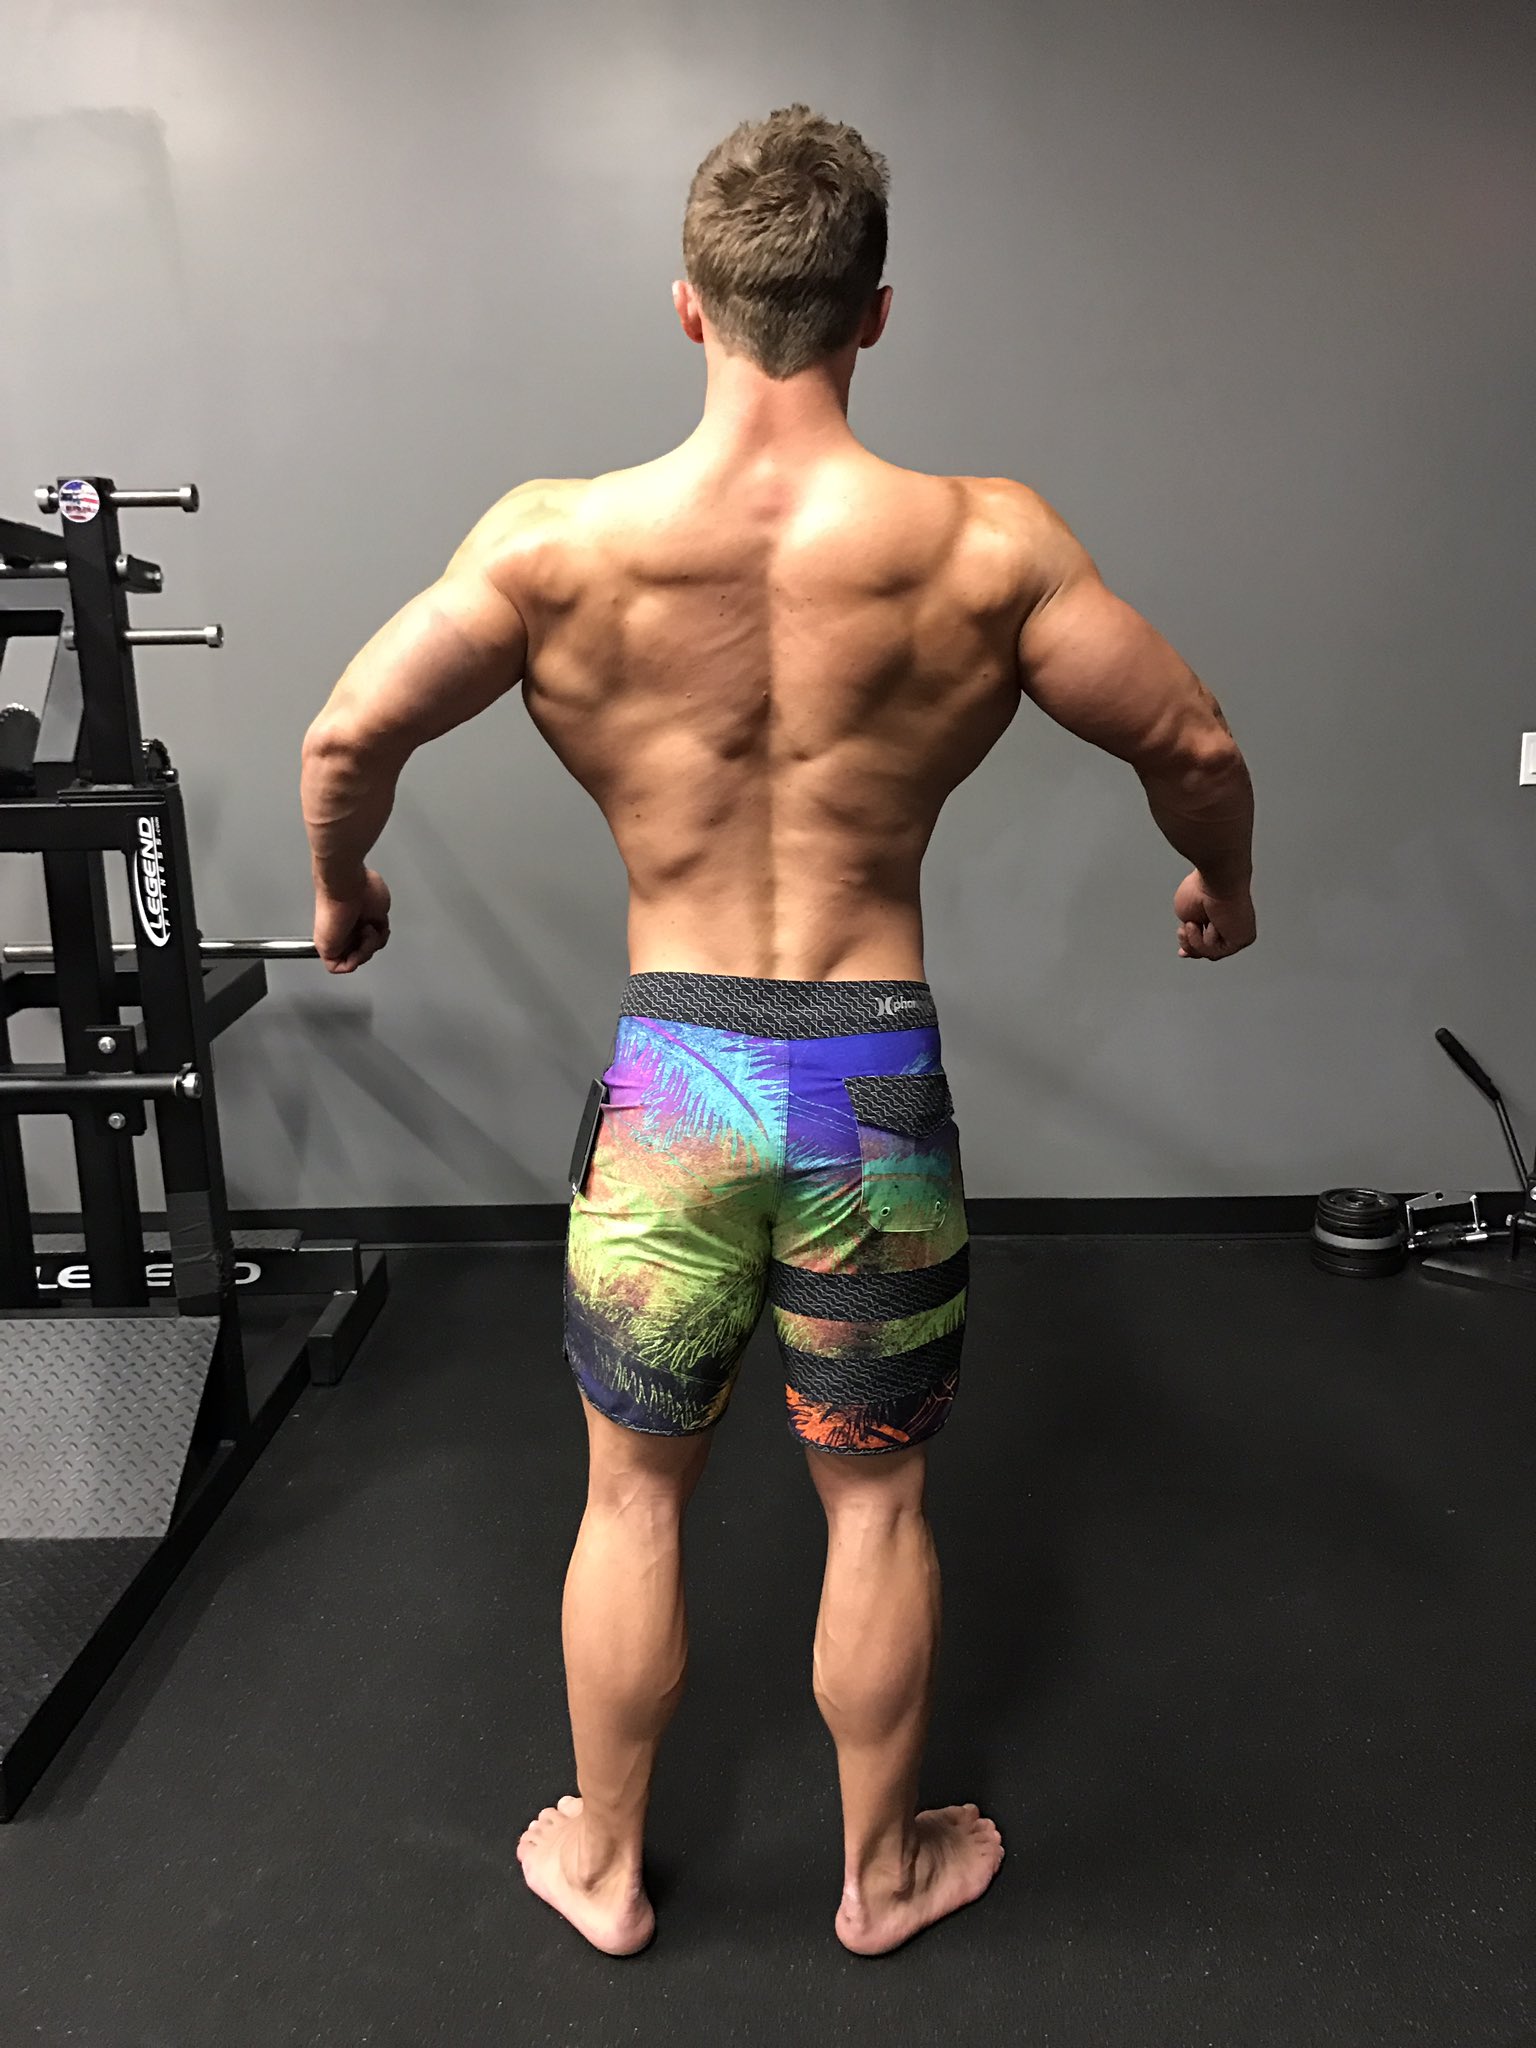 steve cook on Twitter: "Board shorts for the stage? Yes or no?…